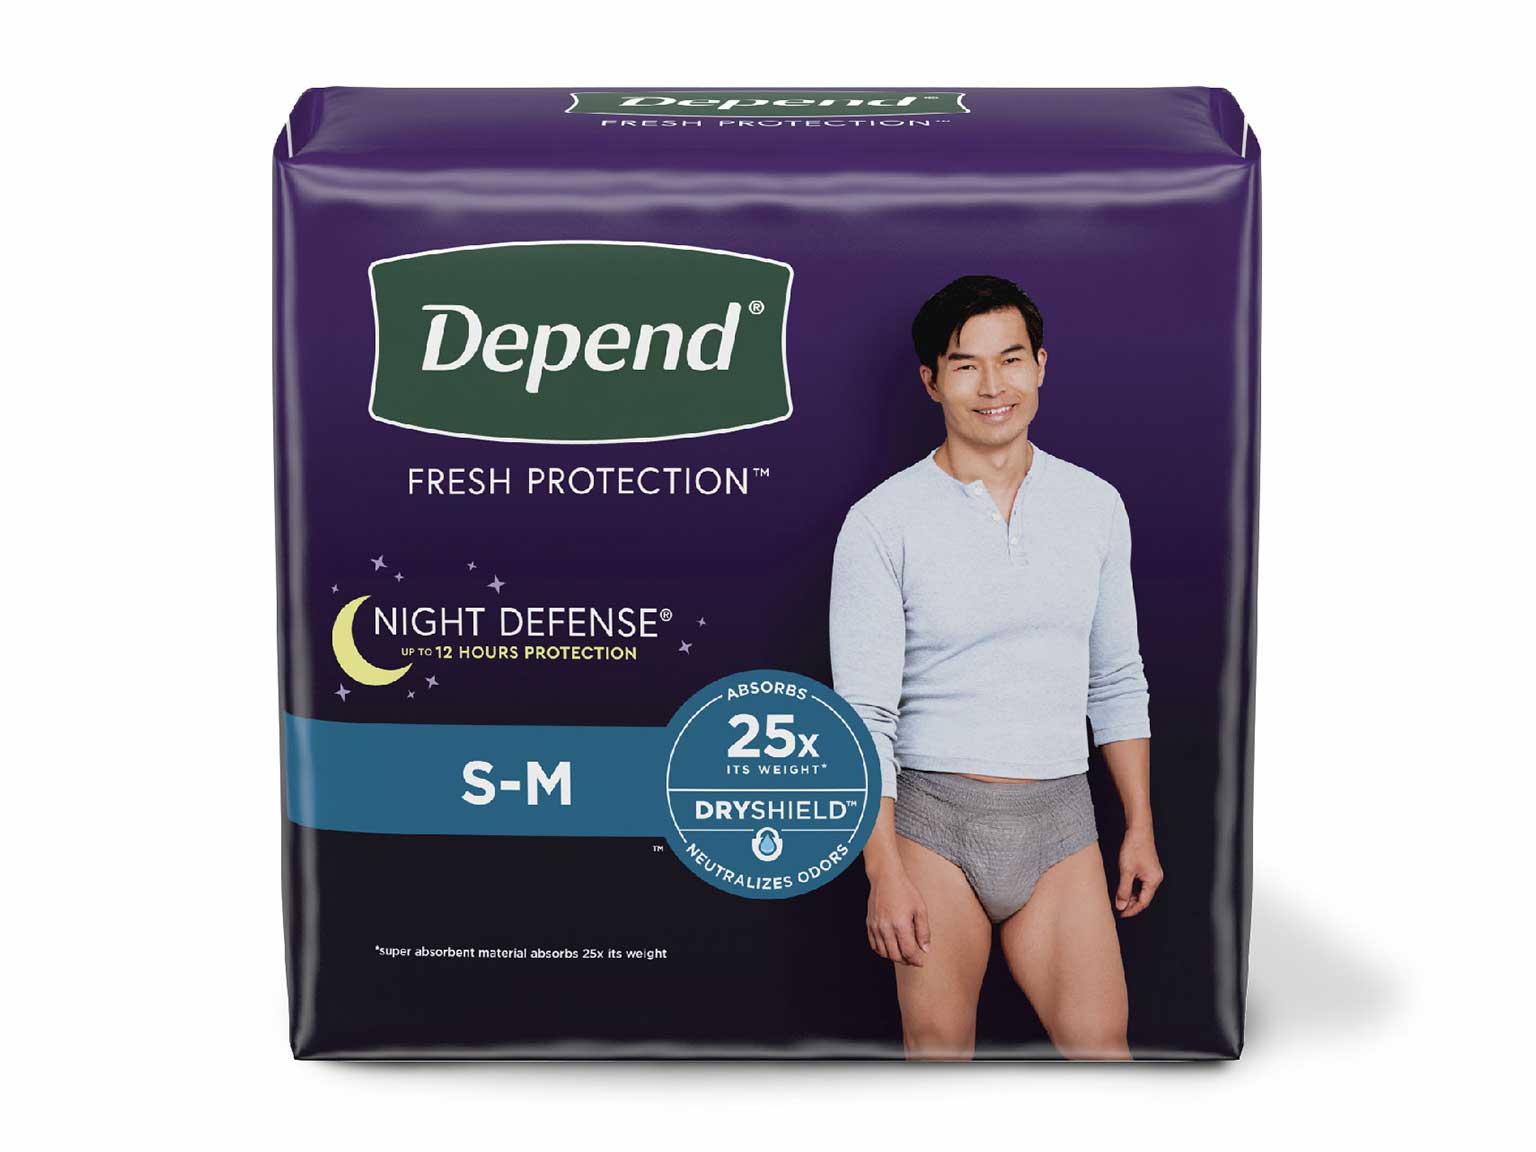 The Most Comfortable Incontinence Underwear: Discover Your Ideal